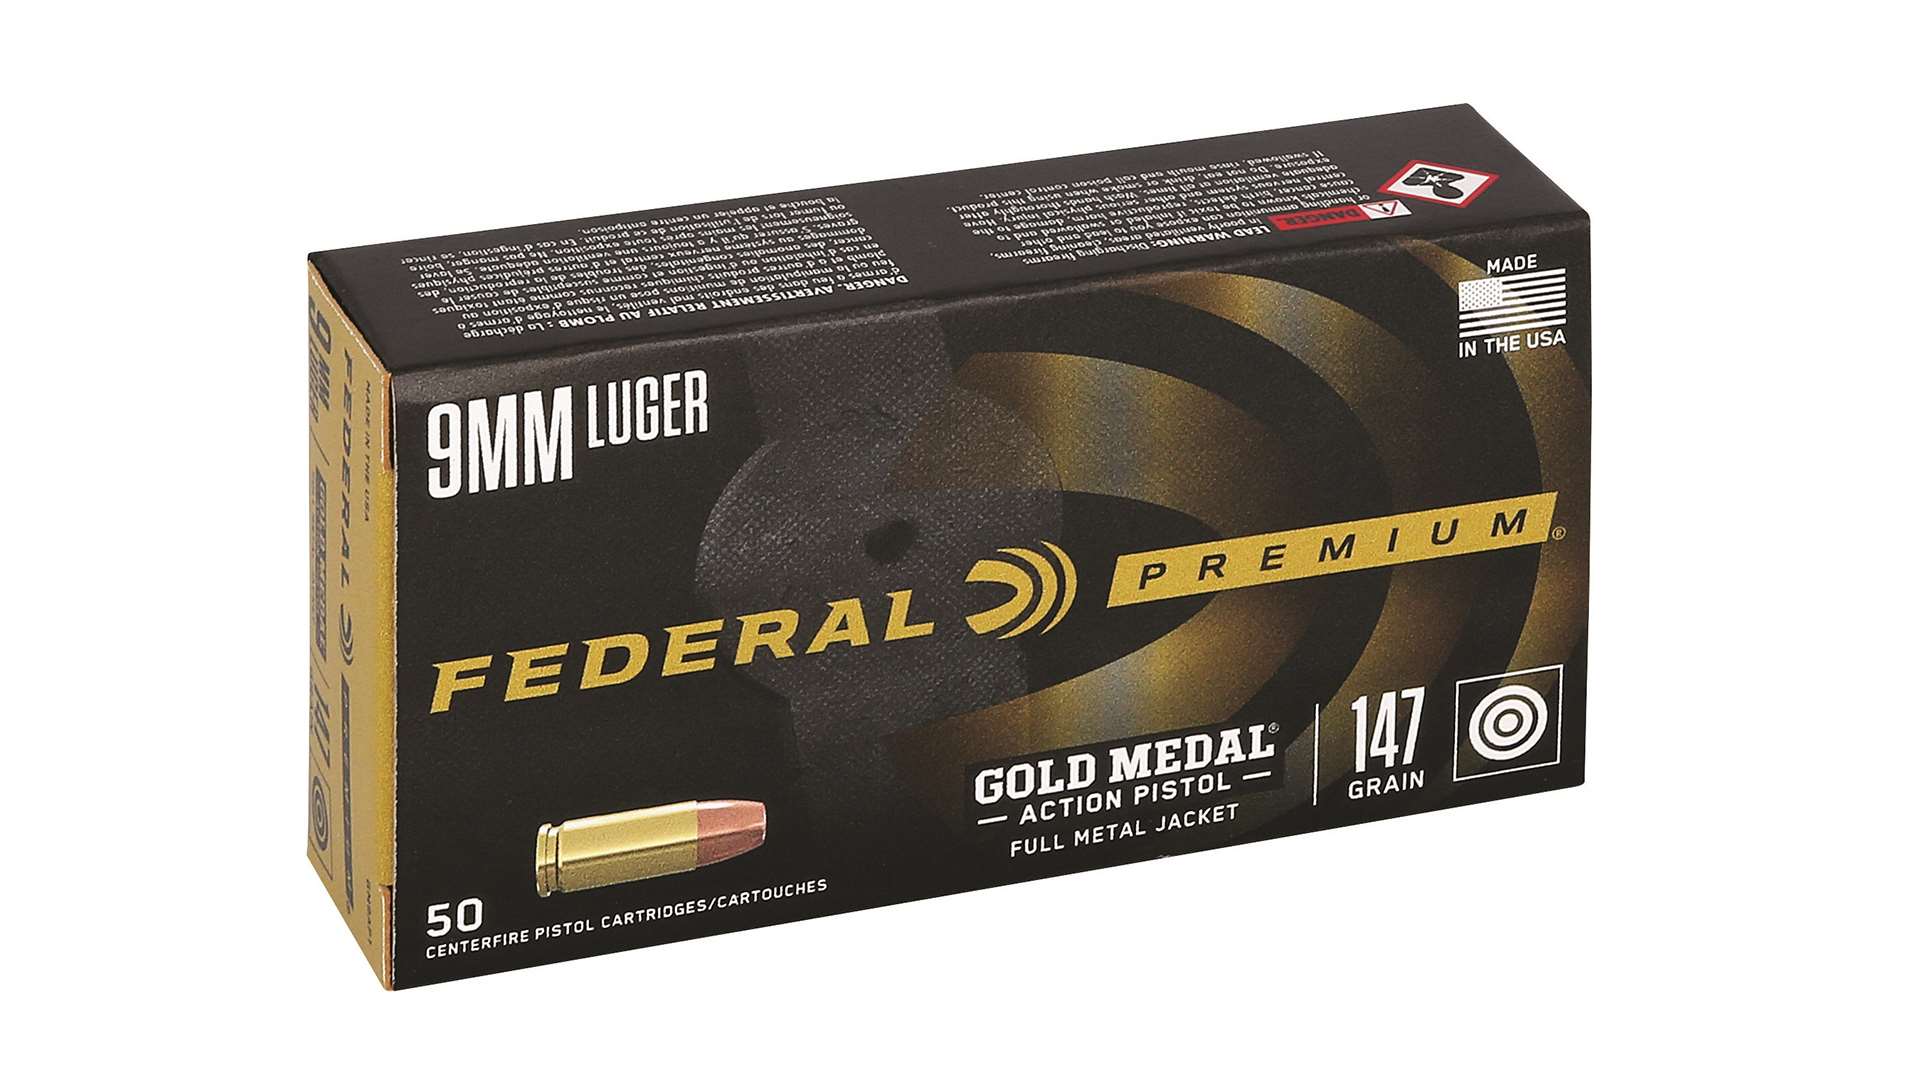 Federal Gold Medal Action Pistol box